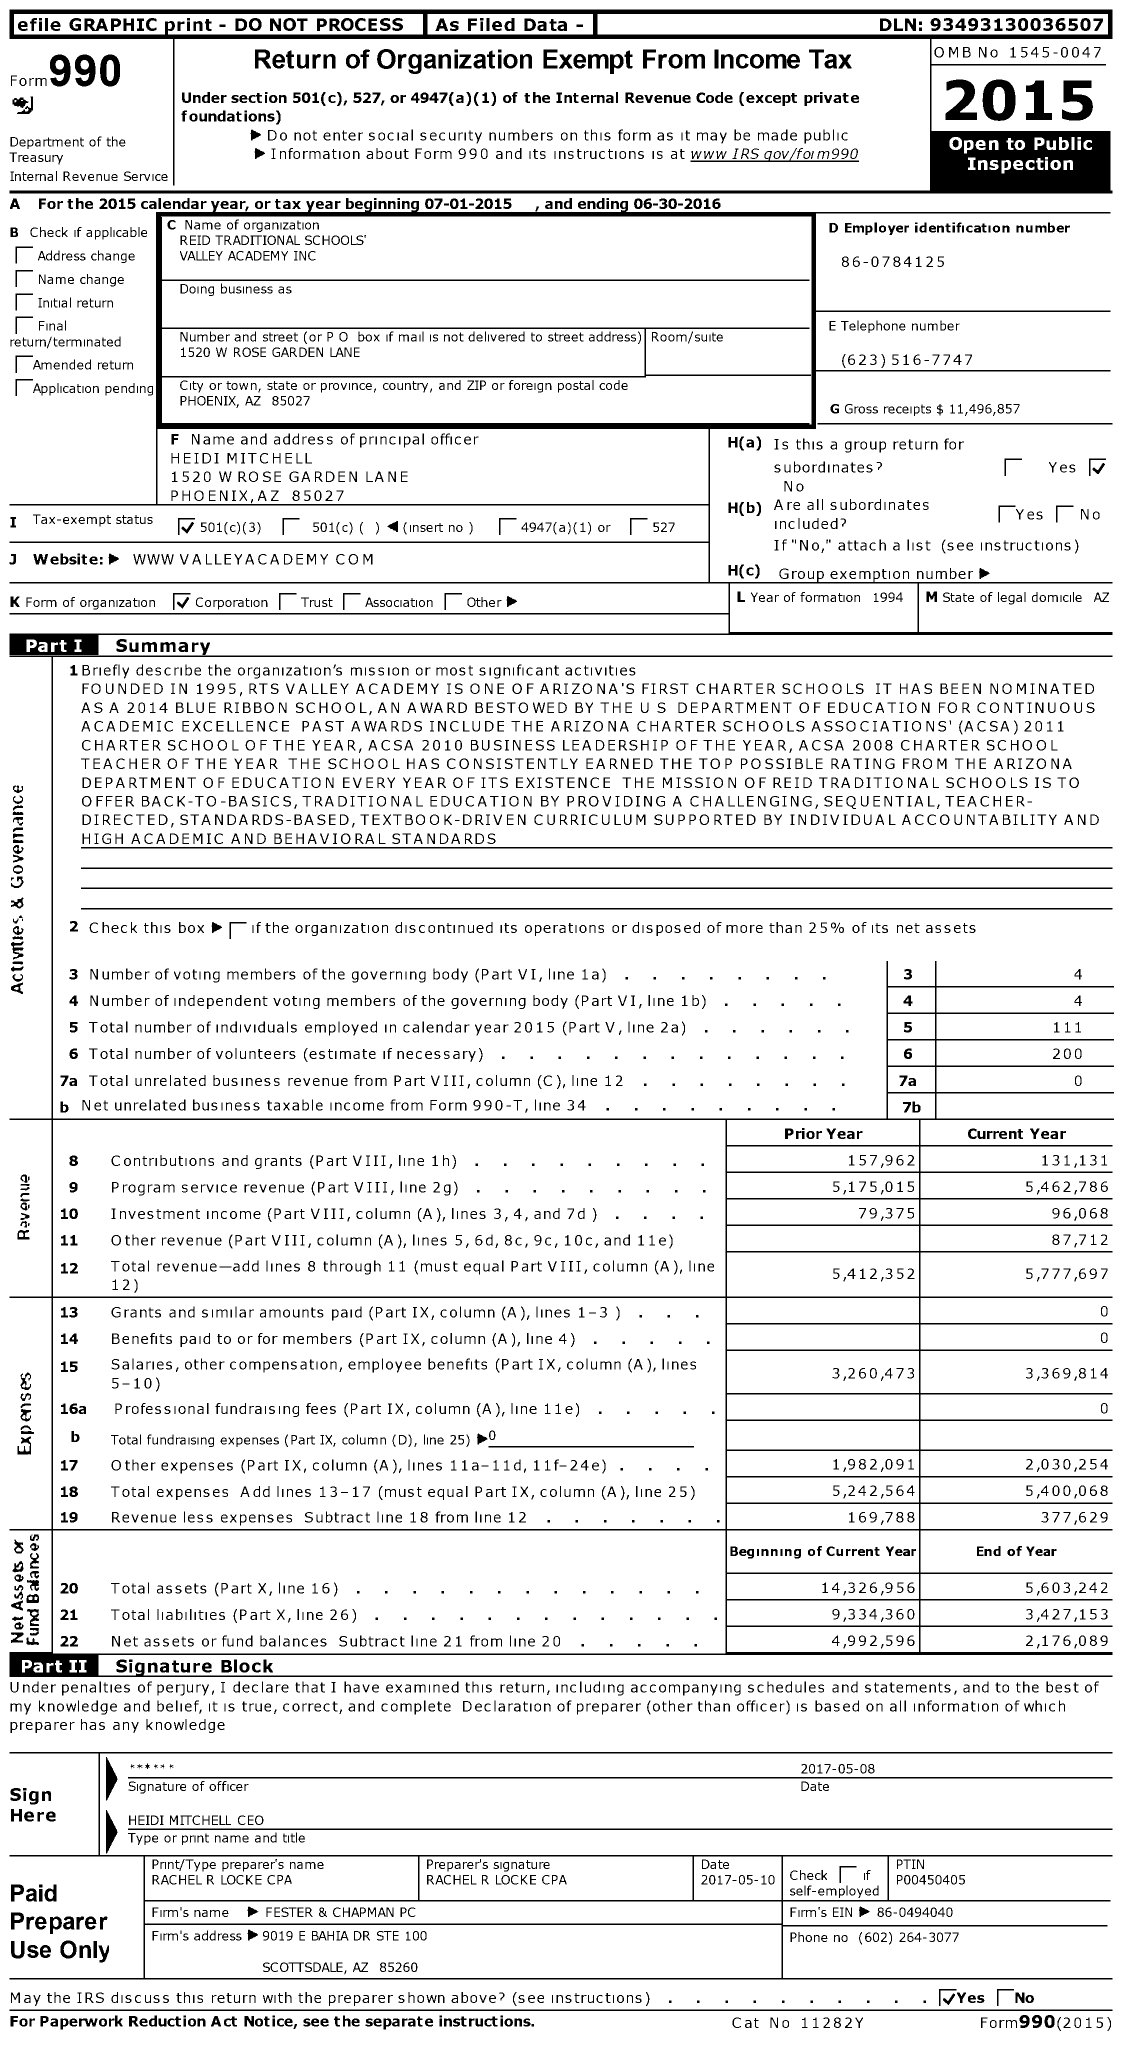 Image of first page of 2015 Form 990 for Reid Traditional Schools' Valley Academy